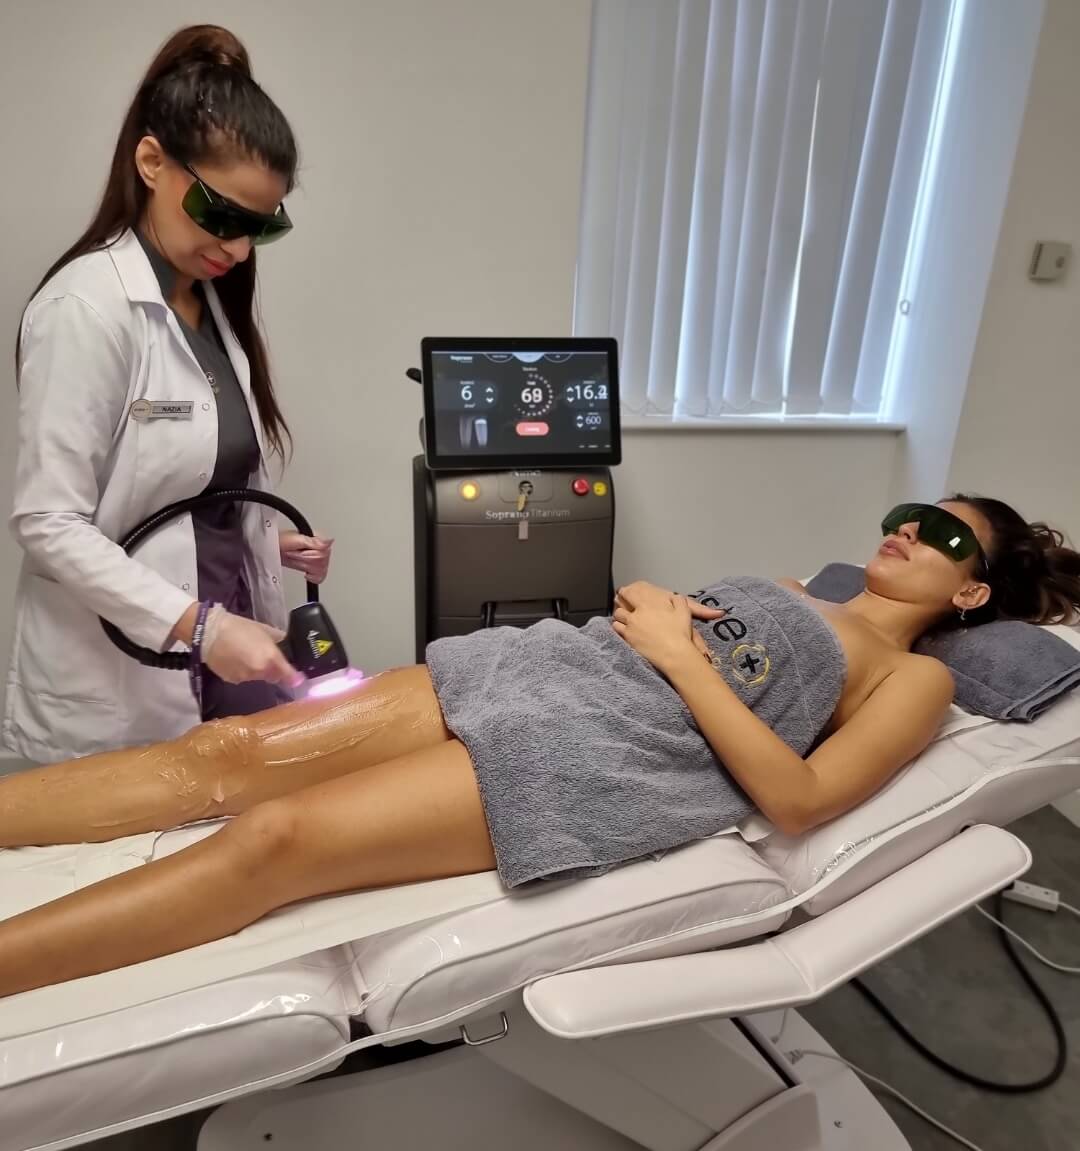 Boca Raton Beauty Defined: The Art of Laser Hair Removal in Boca Raton